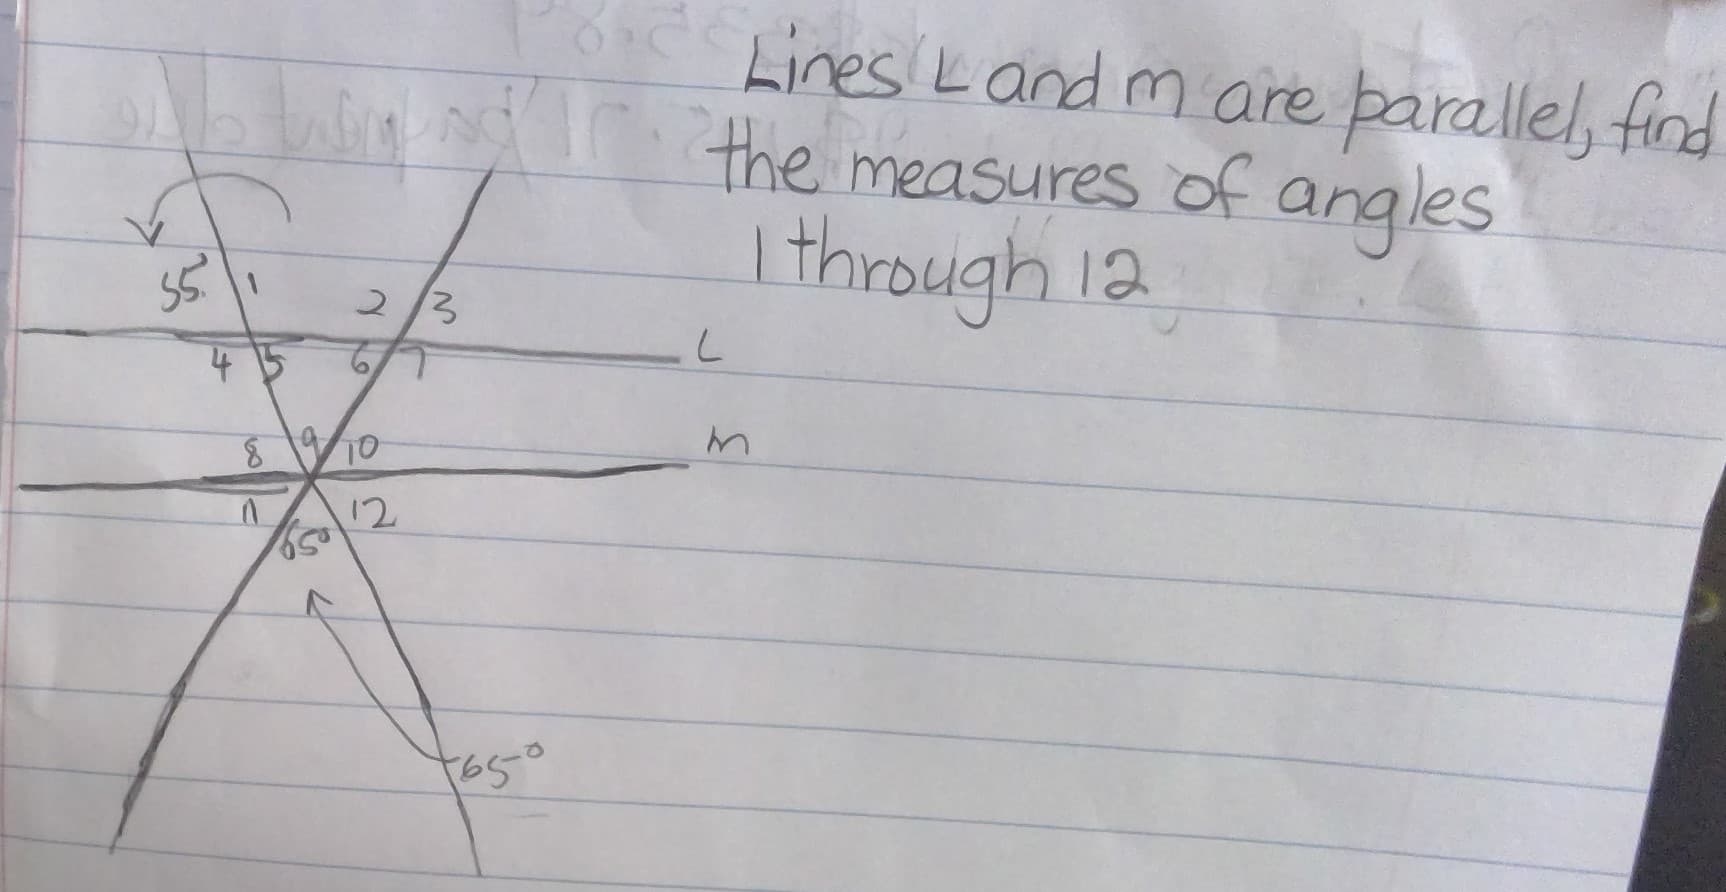 Lines Land m are parallel, find
a the measures of angles
Ithrough 12
2/3
12
165°
